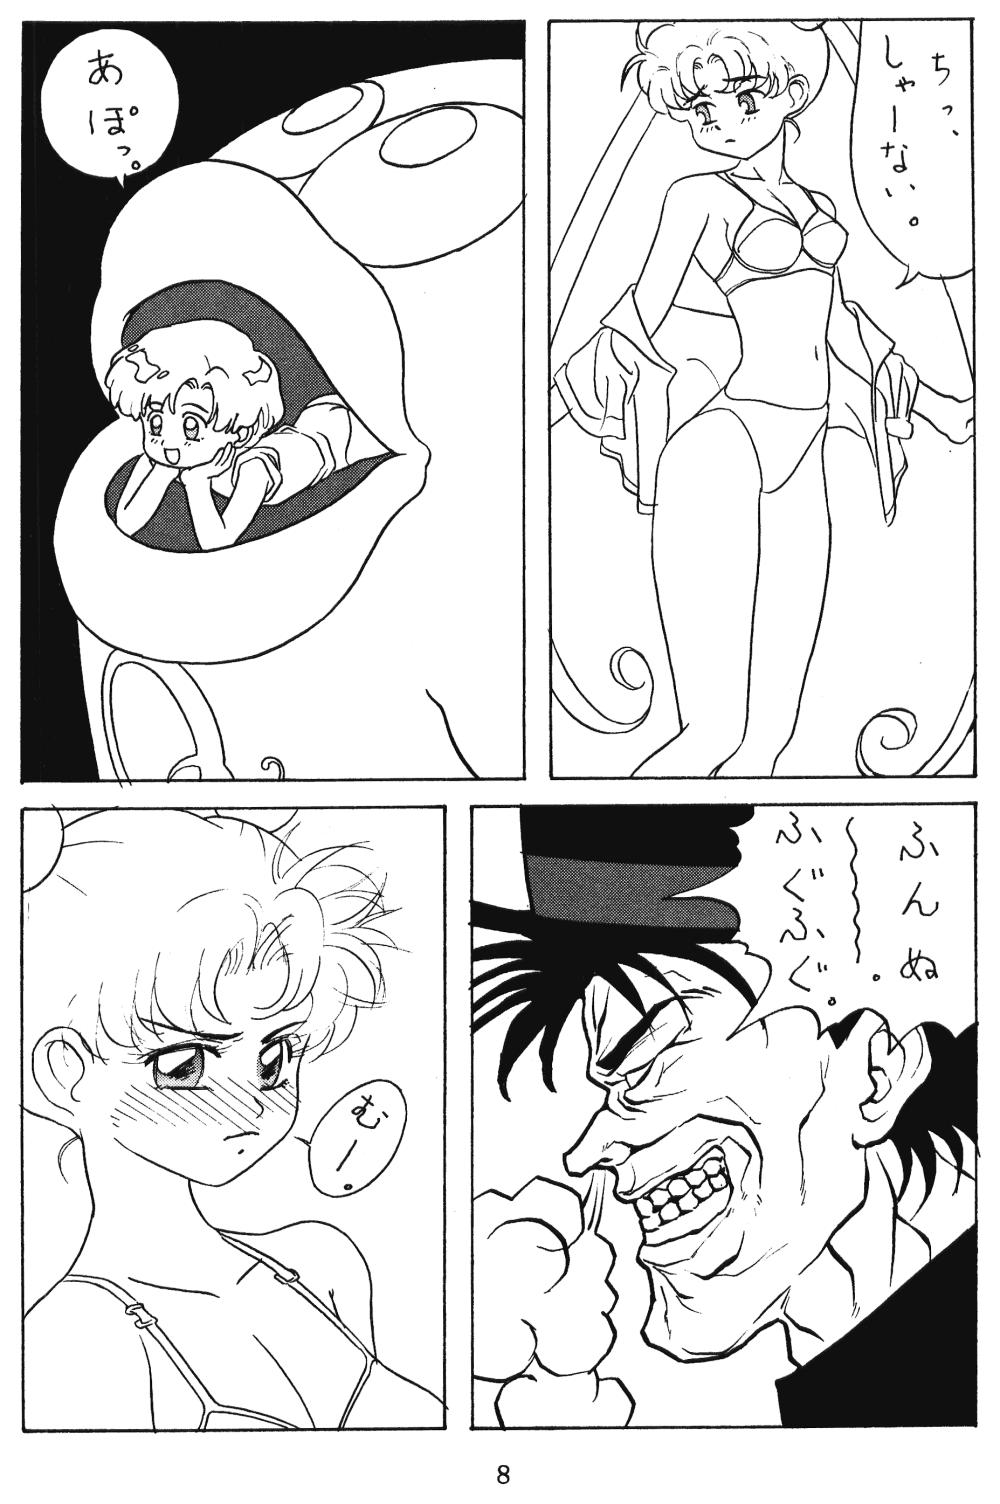 Jeans Tentekomai - Sailor moon Ranma 12 Ghost sweeper mikami Youth Porn - Page 9